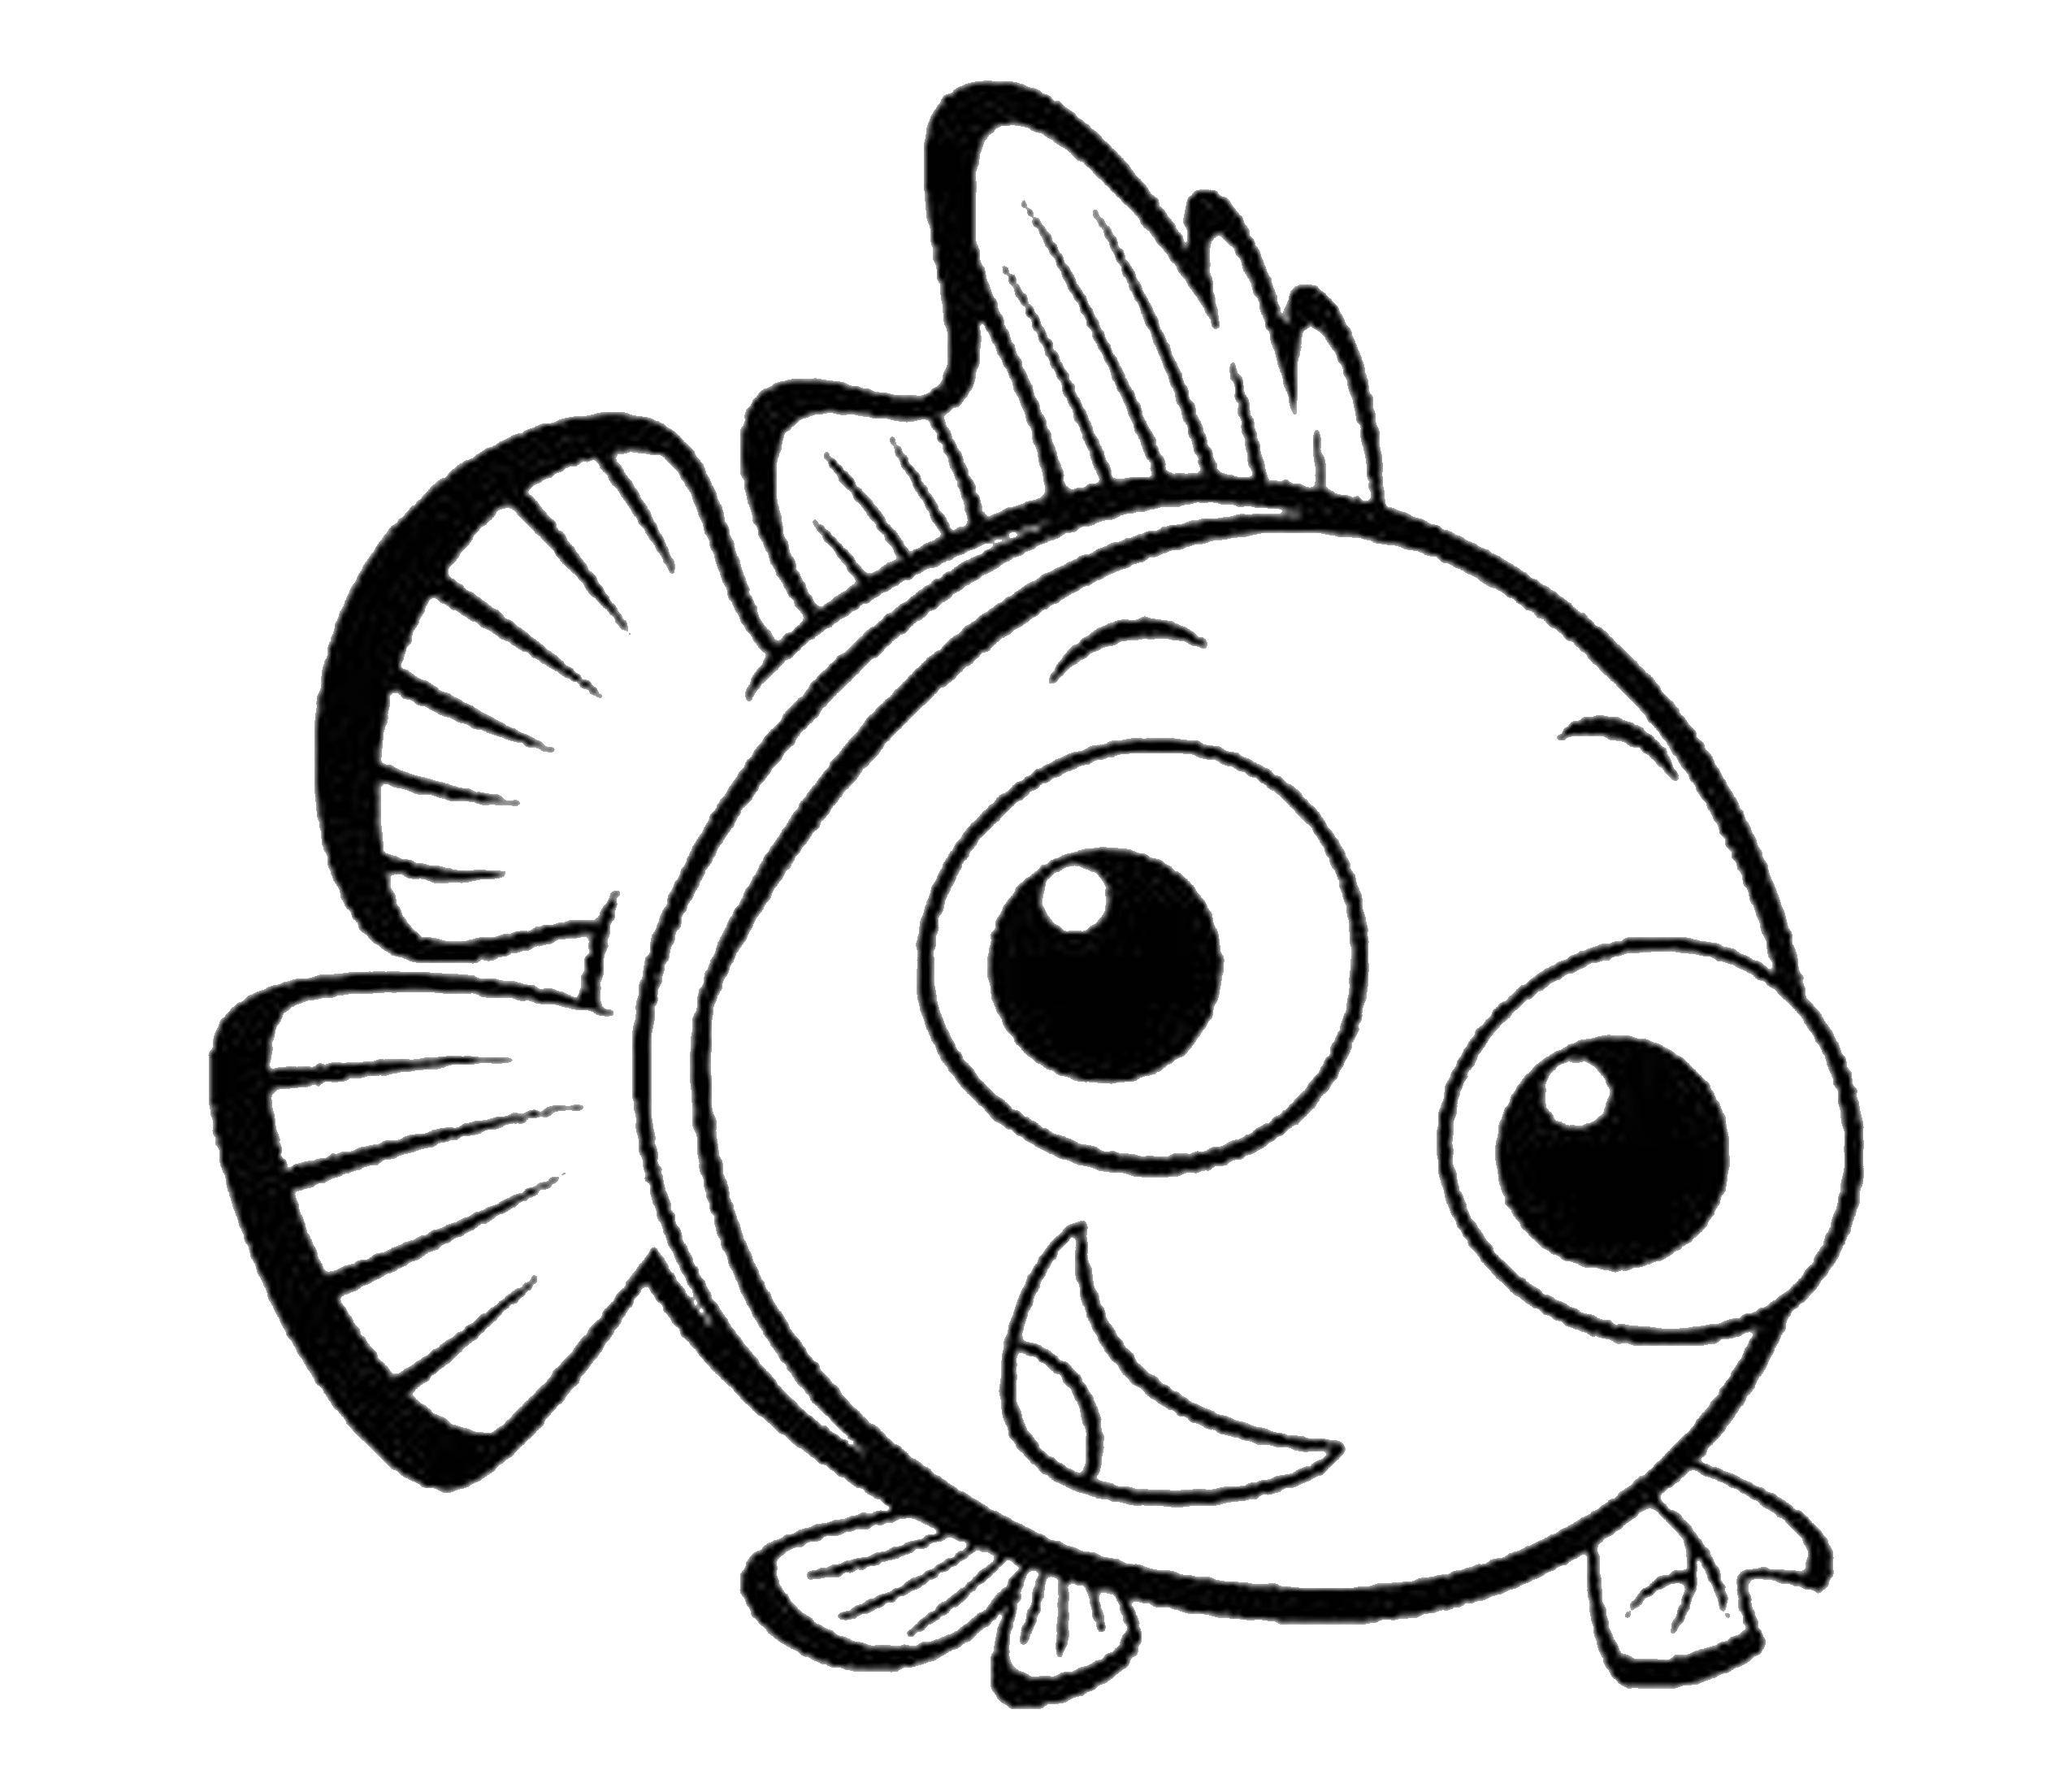 Coloring Fish. Category Disney coloring pages. Tags:  Underwater world, fish.